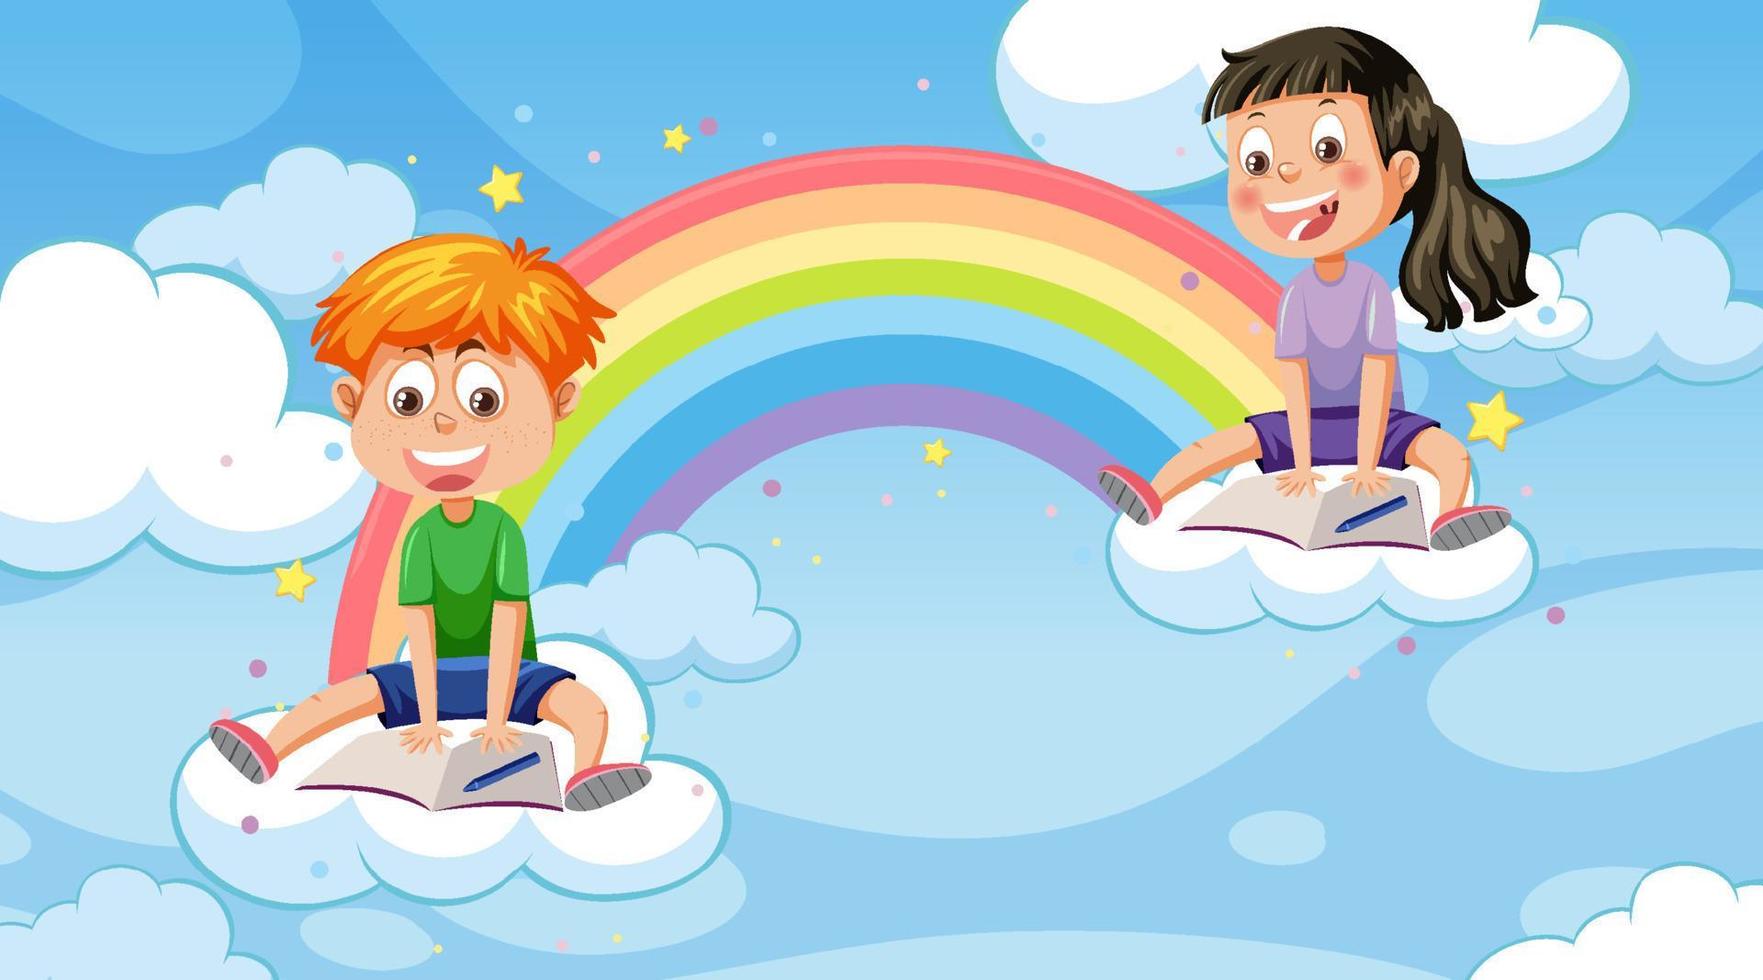 Kids sitting on the clouds in the sky vector